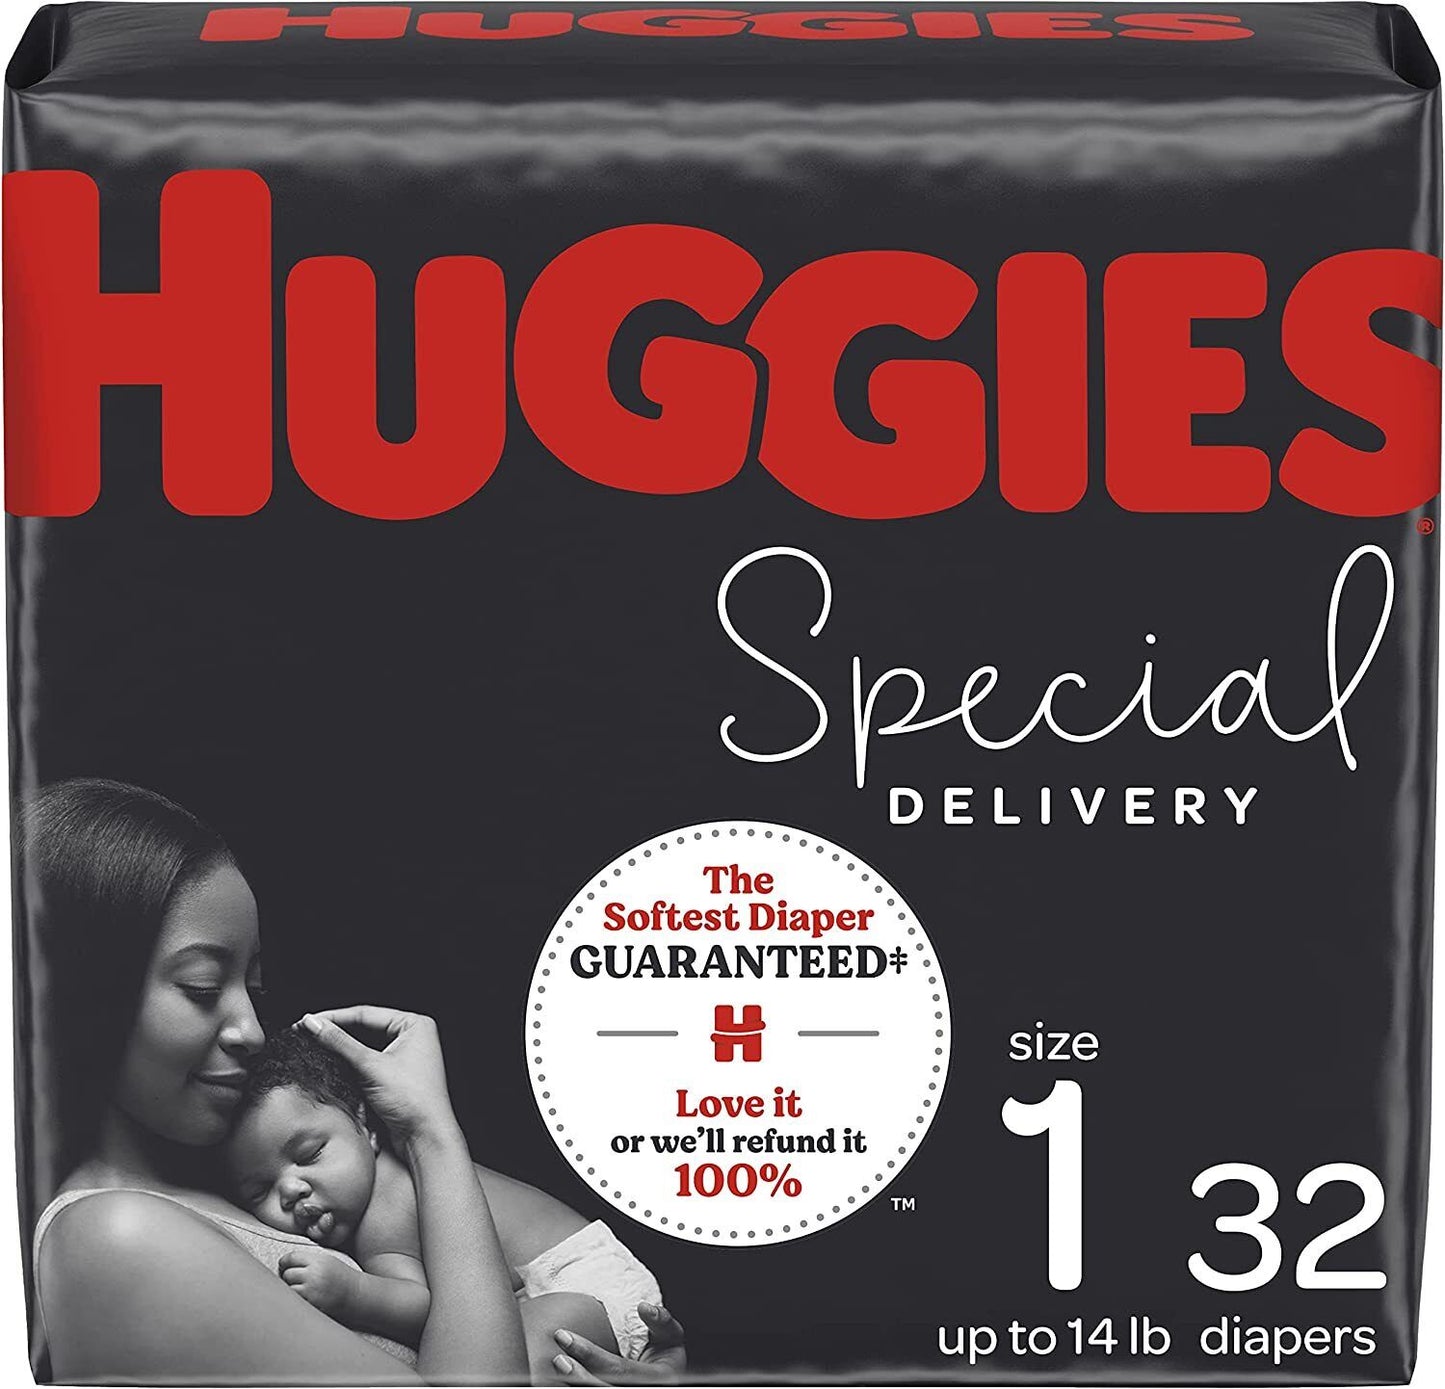 Special Delivery Hypoallergenic Baby Diapers for Sensitive Skin, Sizes N - 6